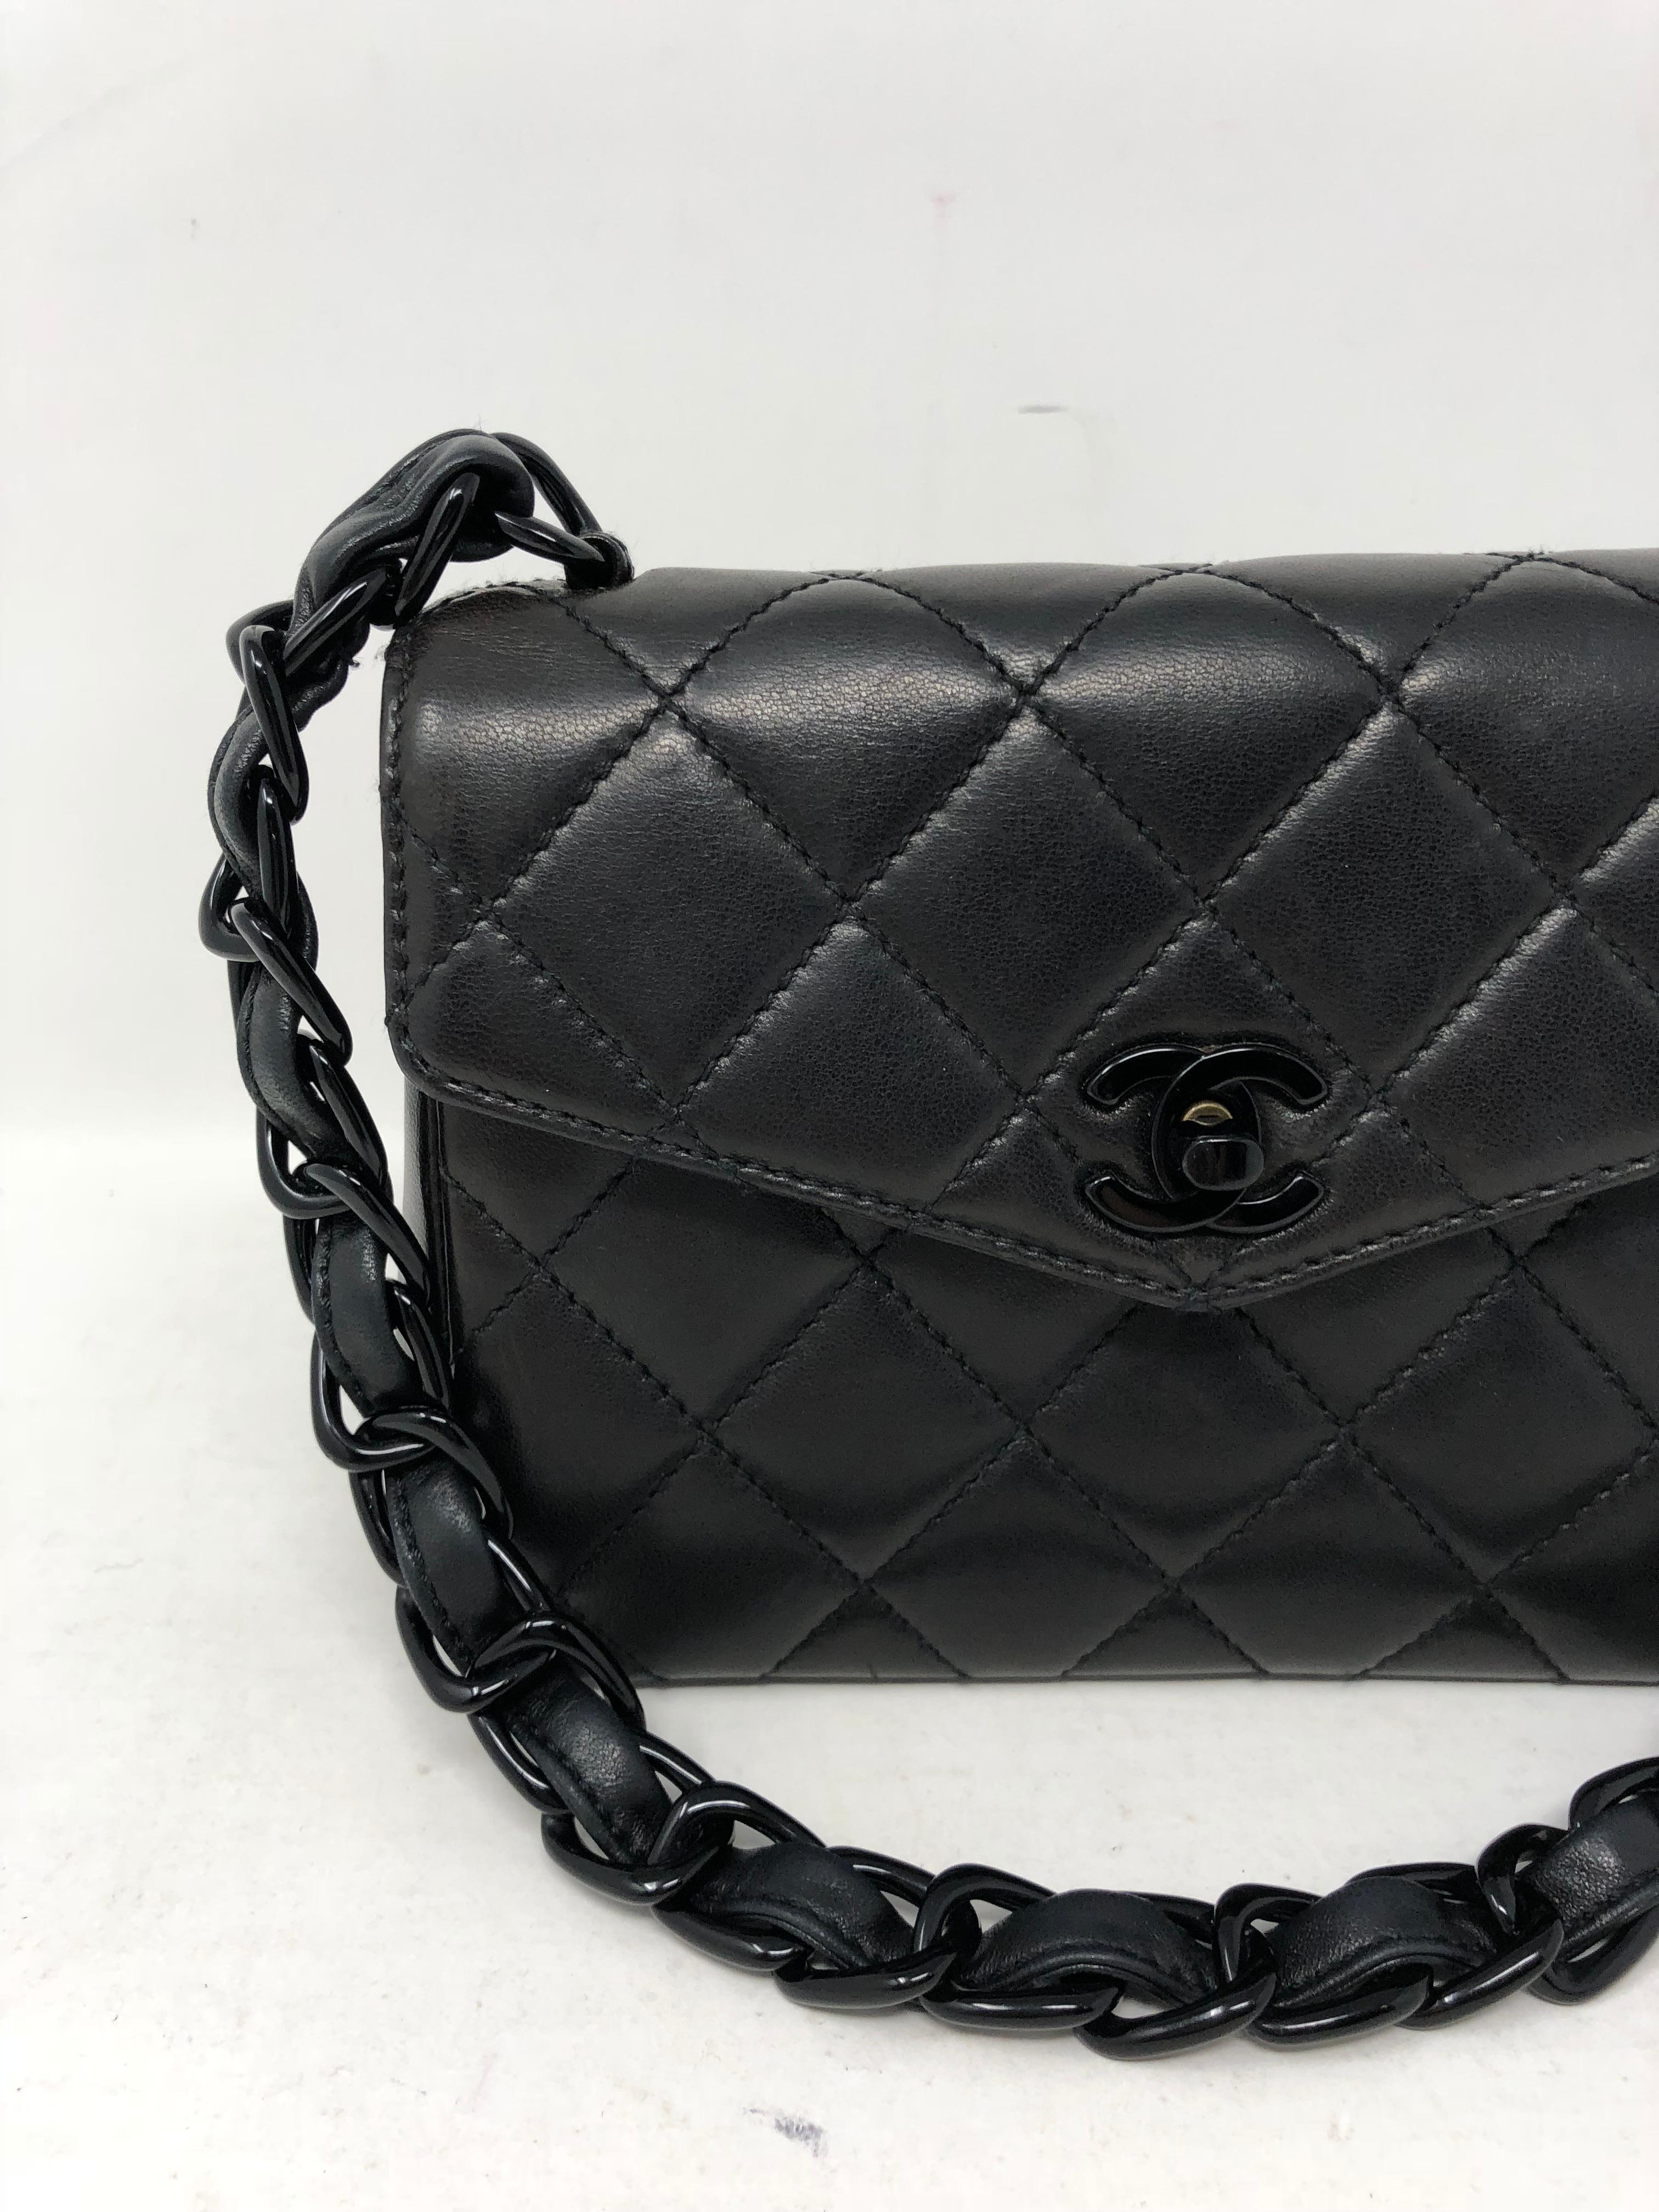 Chanel So Black Mini Bag. Lambskin leather with black hardware and short strap with woven black plastic chain. Mini size perfect for going out. Mint condition and rare collector's piece. Guaranteed authentic. 